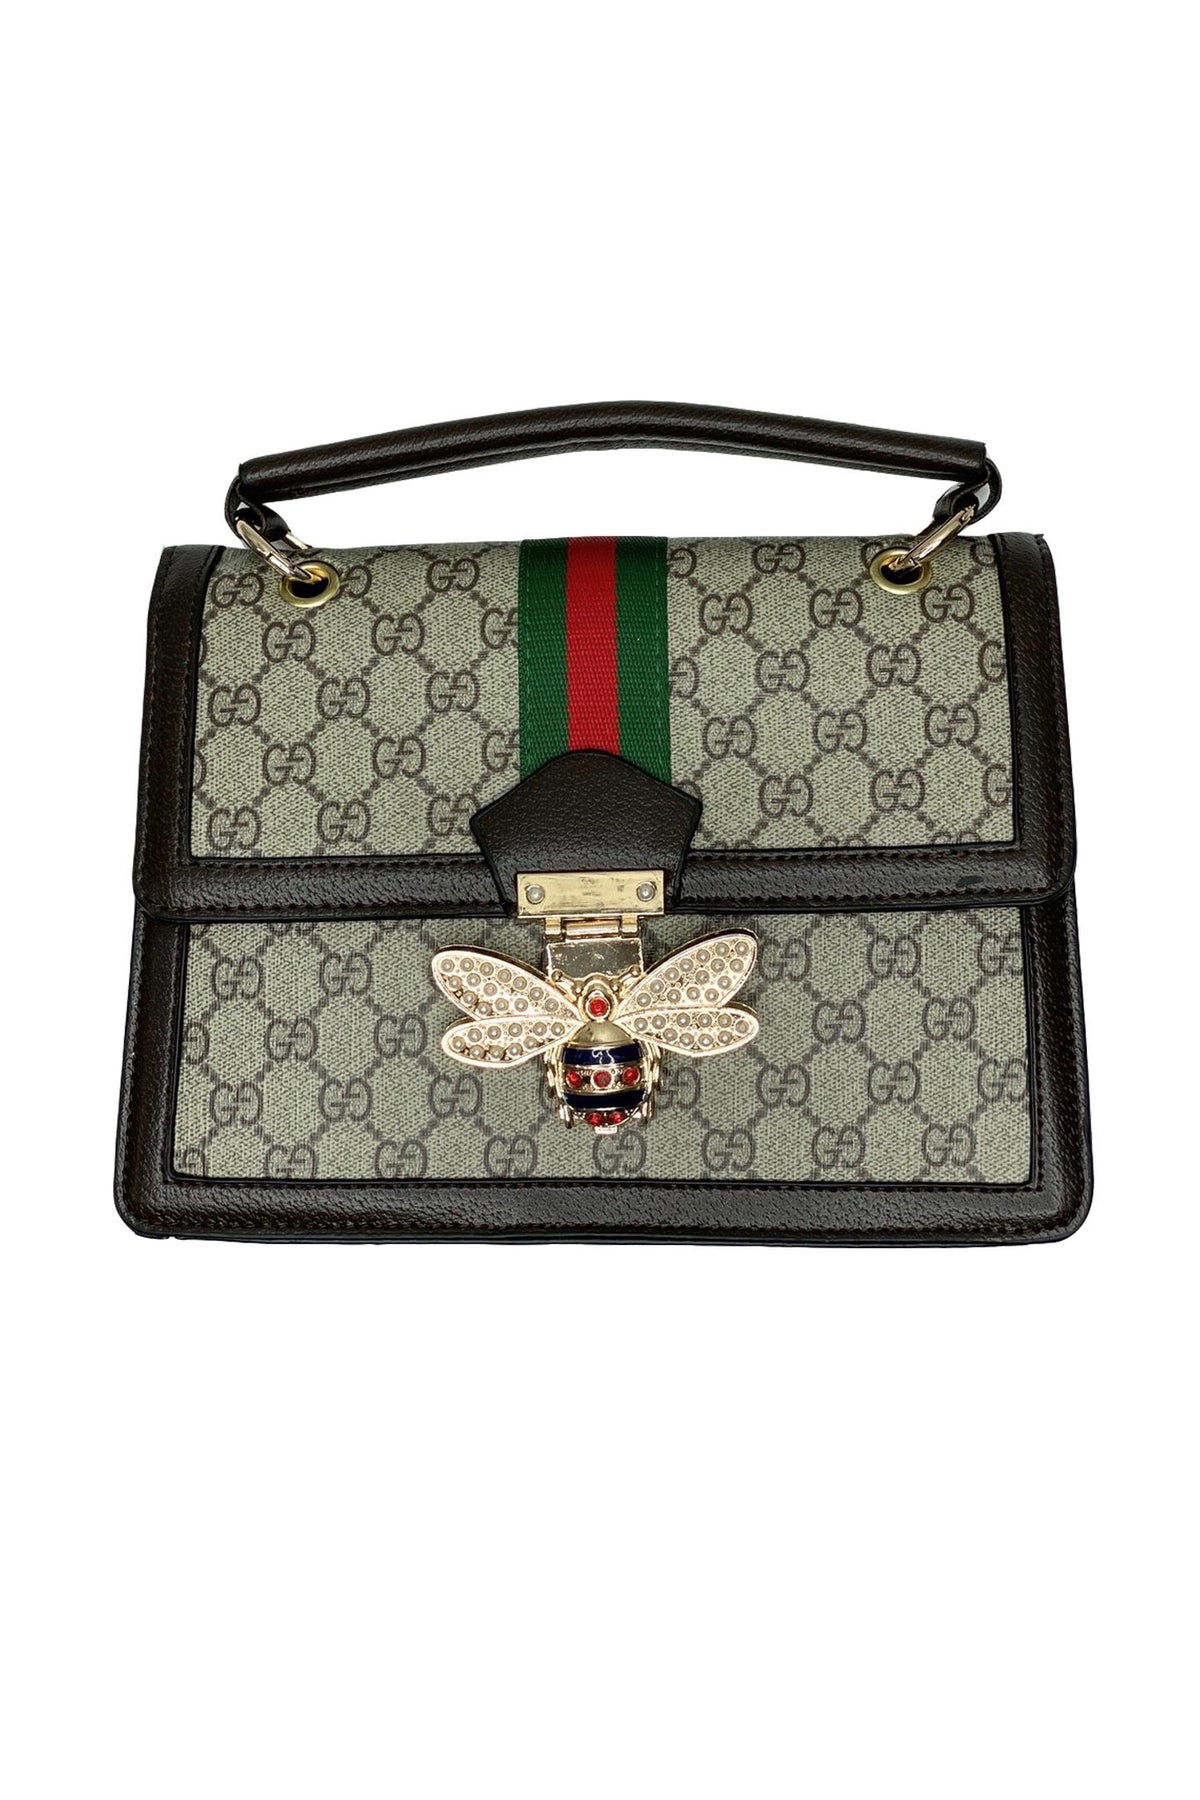 gucci bag with bee on it